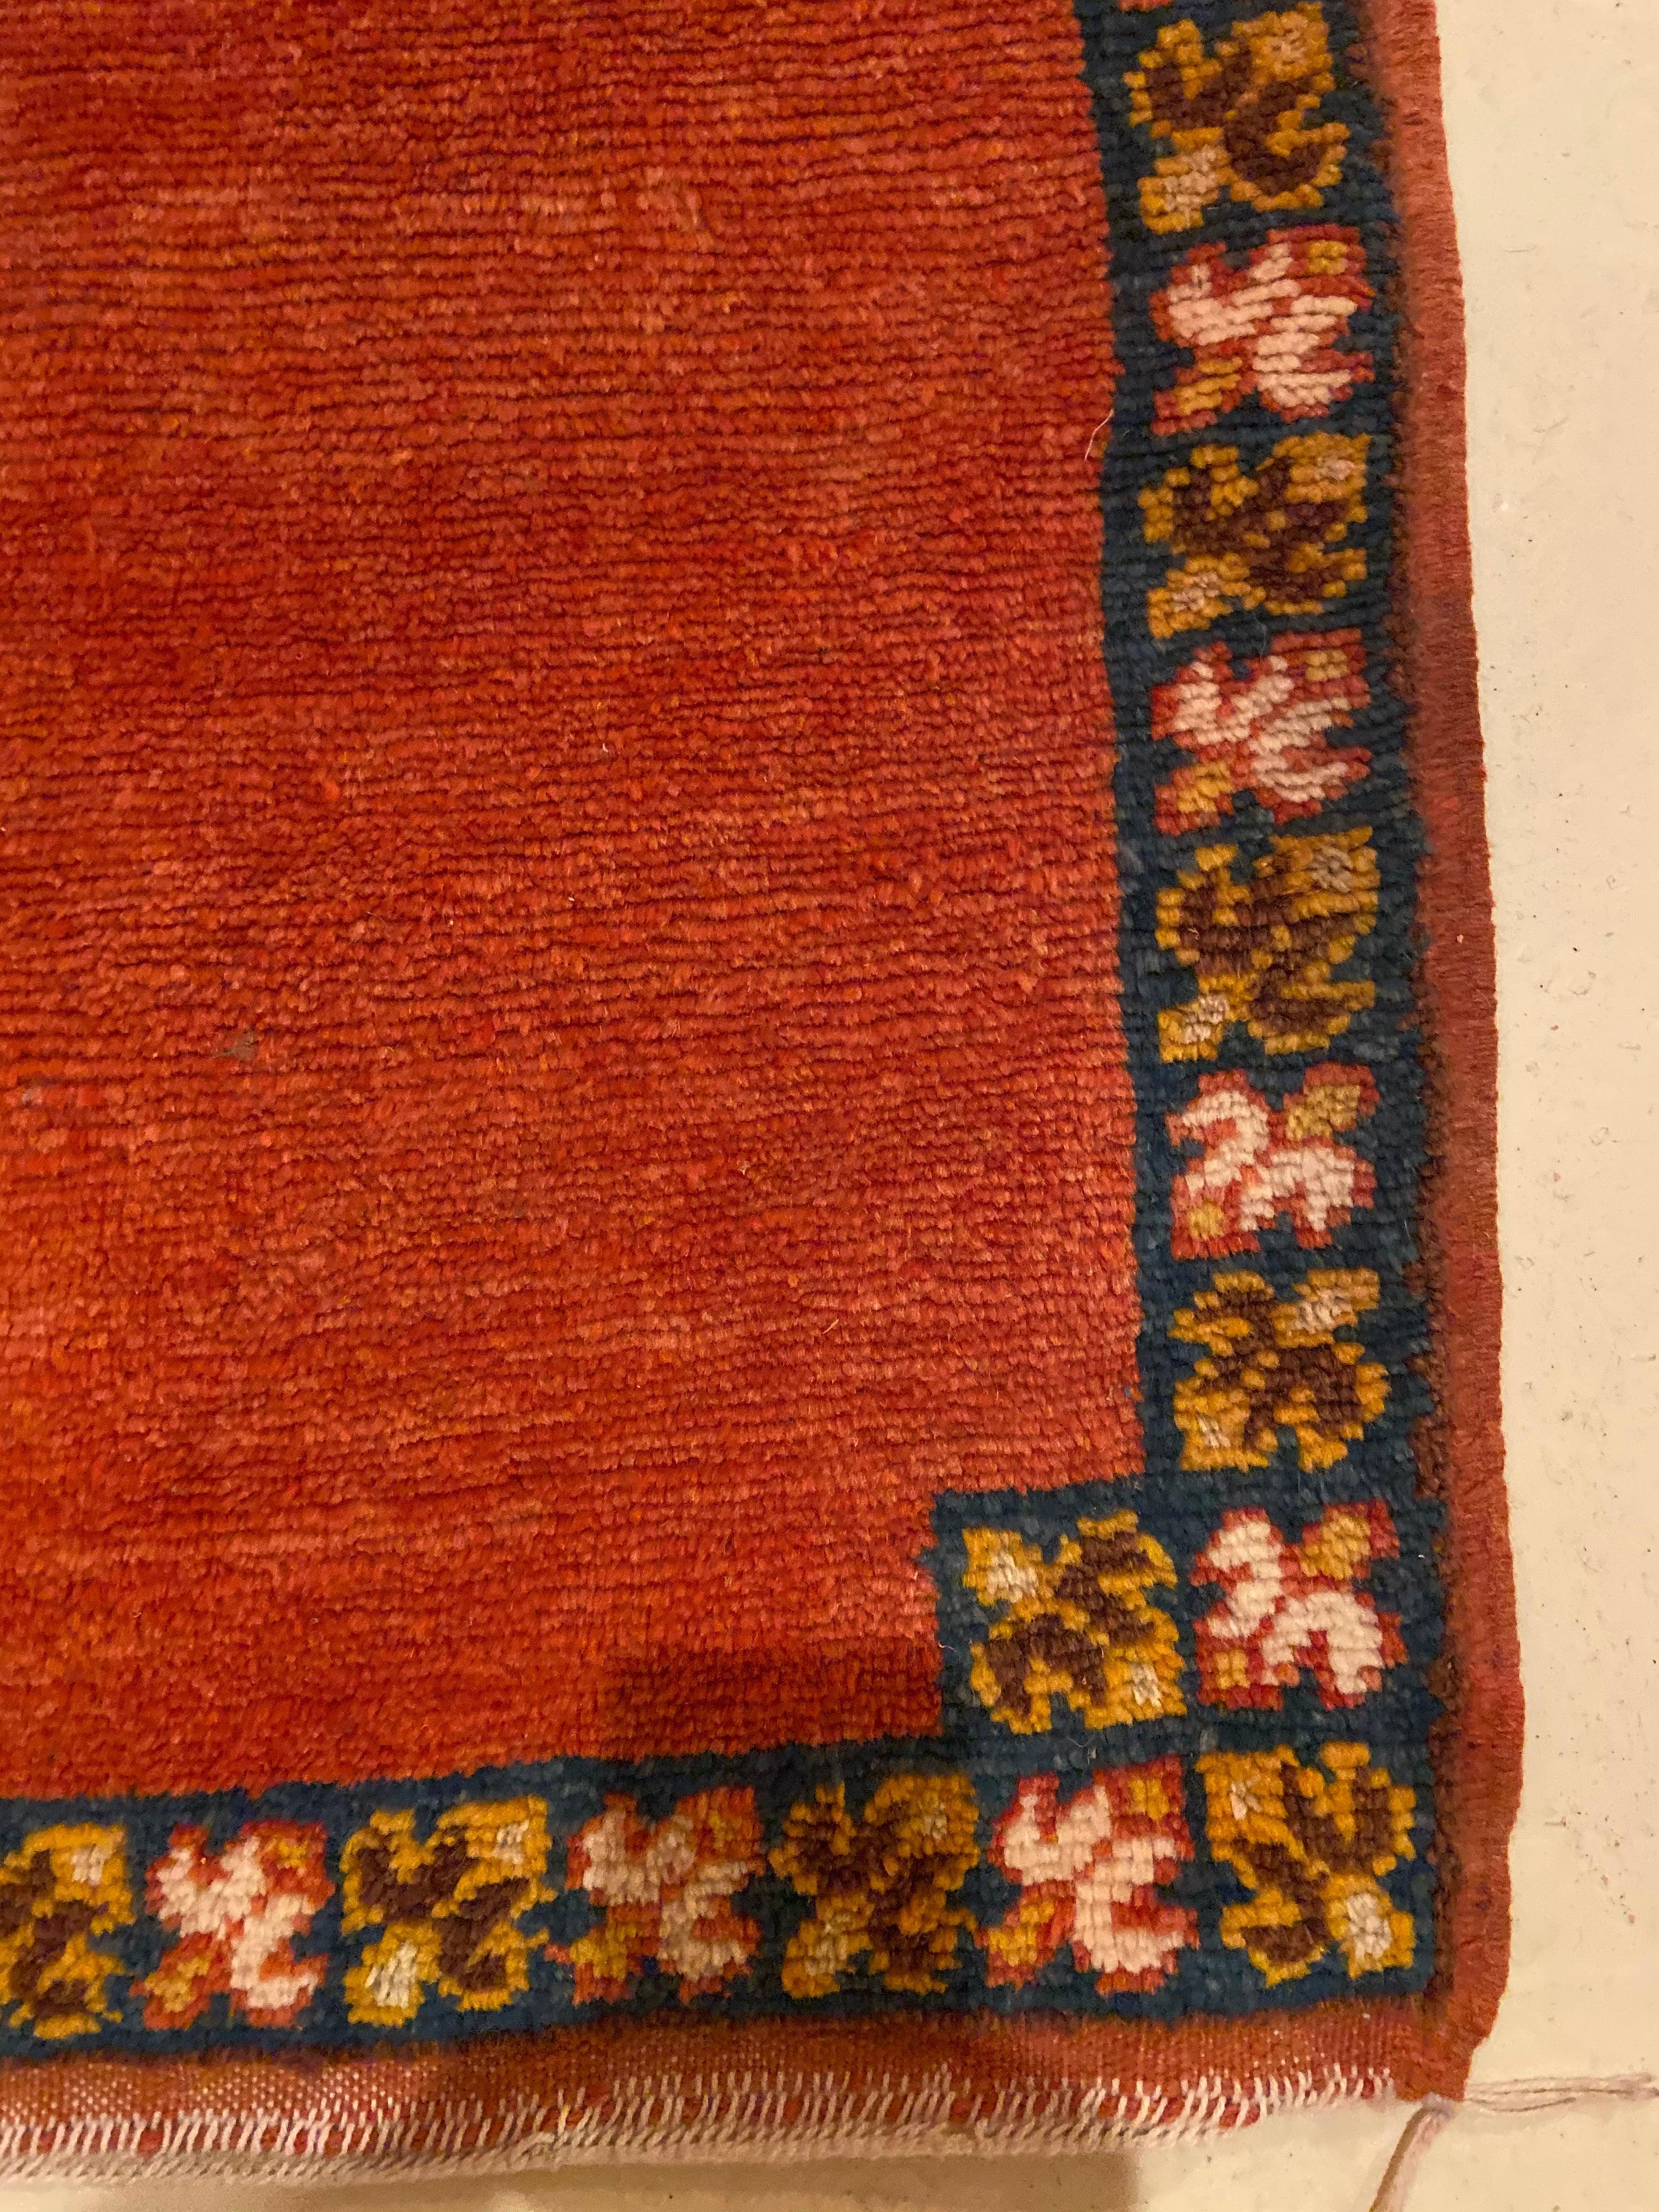 Moroccan Tribal Handwoven Rug or Carpet Wool with Blue Diamond on Red Background 2